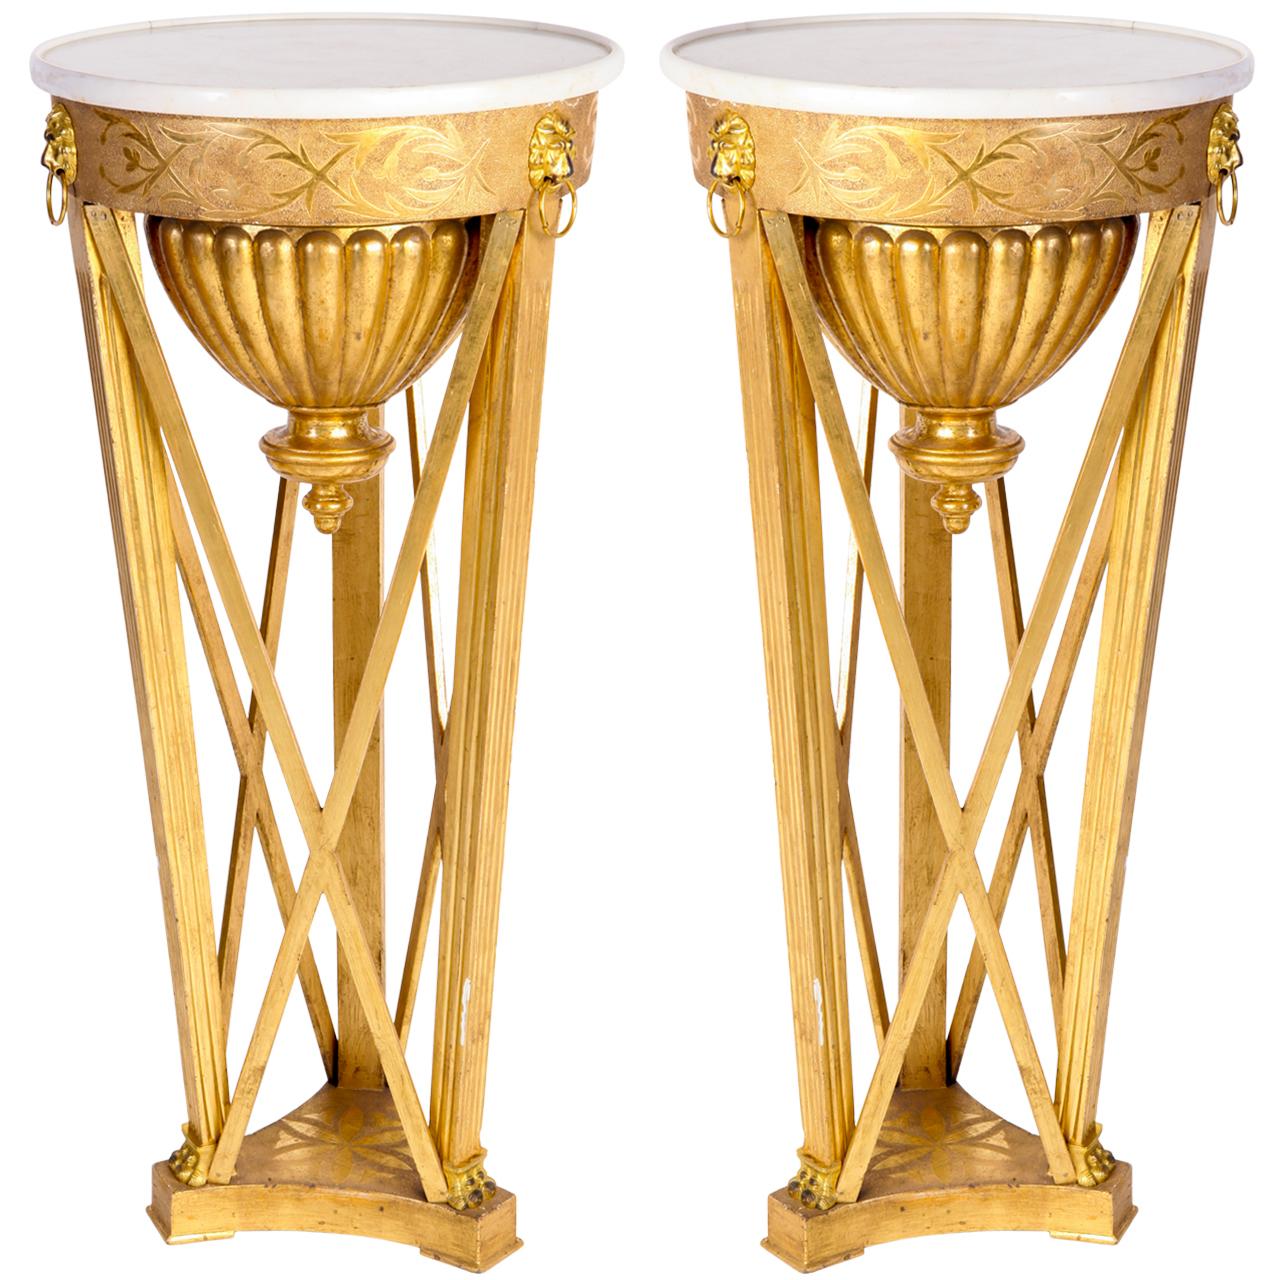 Pair of Italian Neoclassical Guéridons or Side Tables Tuscany, 1830 For Sale